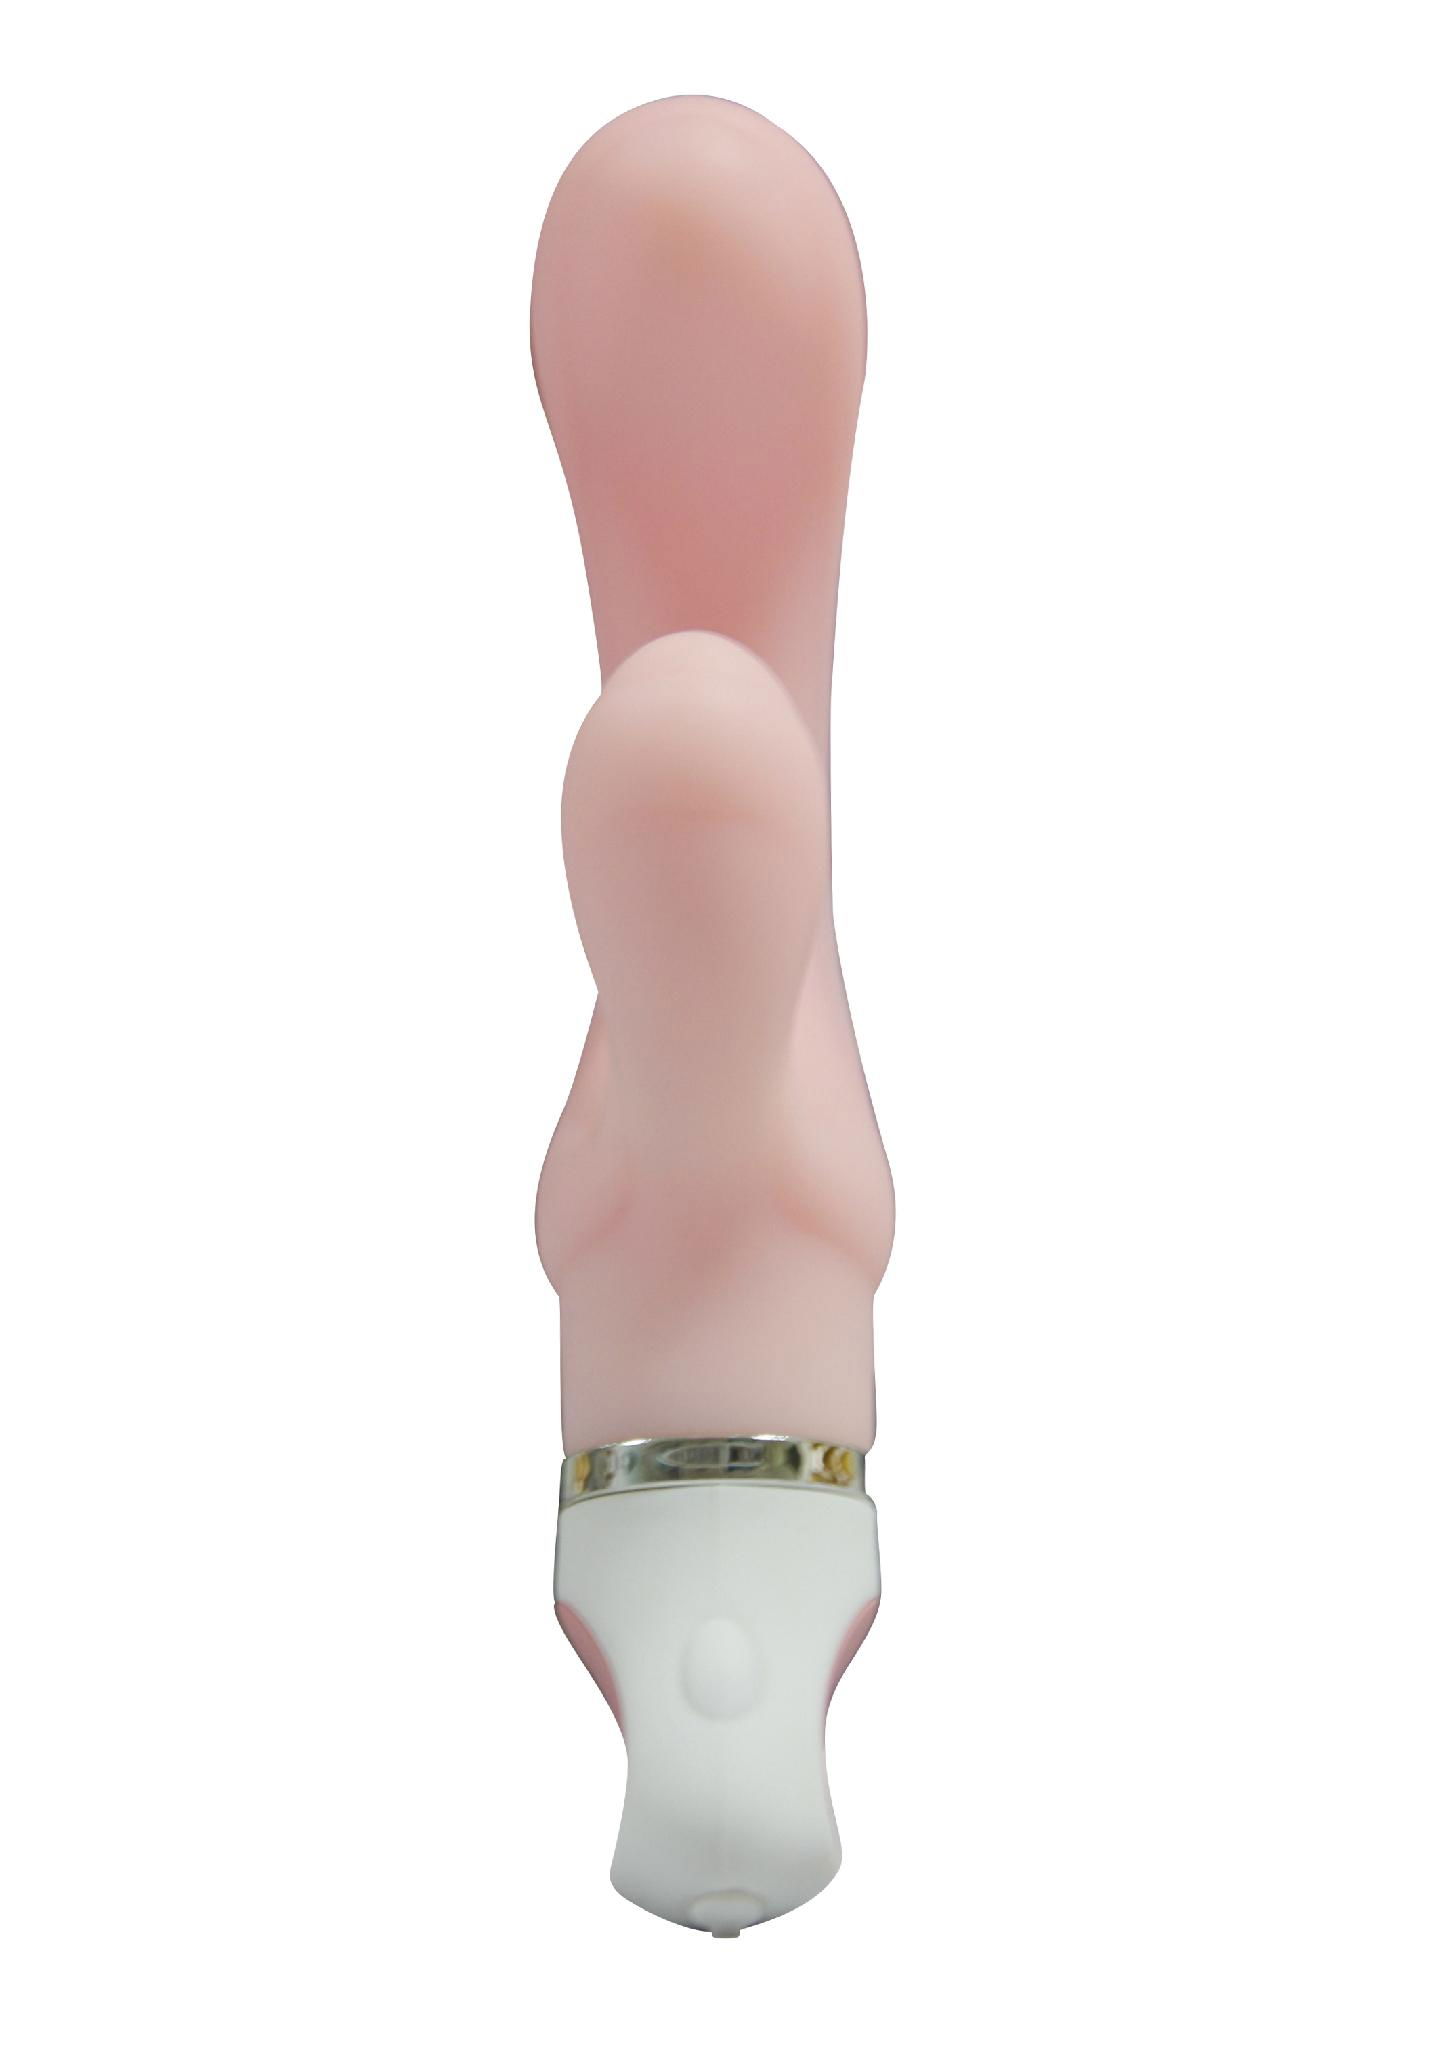  Magnificent G-spotI Vibrator sex toys products for women  2